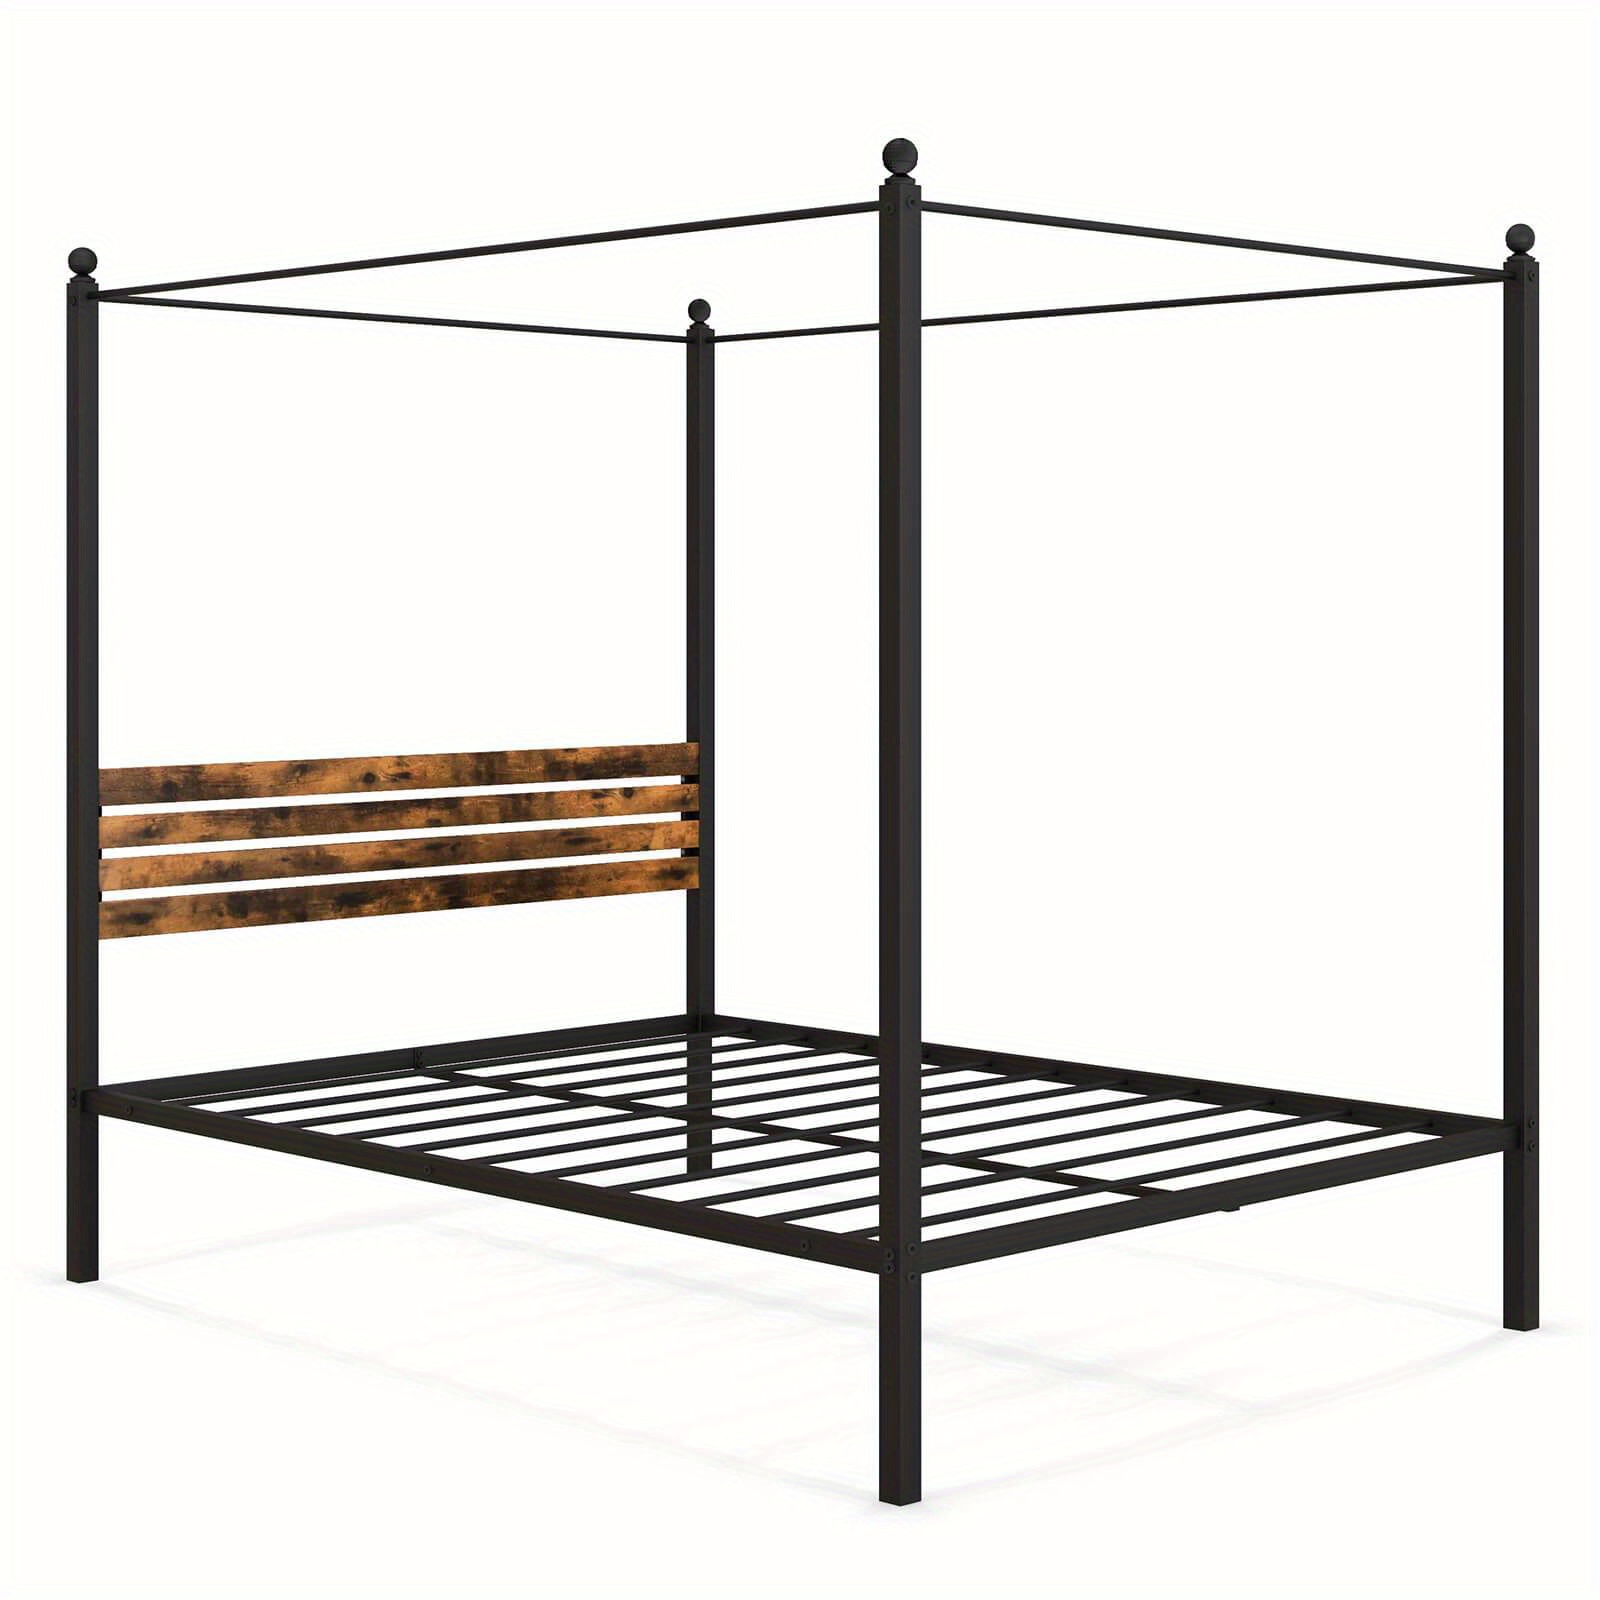 

Costway Queen Size Canopy Bed Frame 4-poster Platform Bed Frame W/ Industrial Headboard